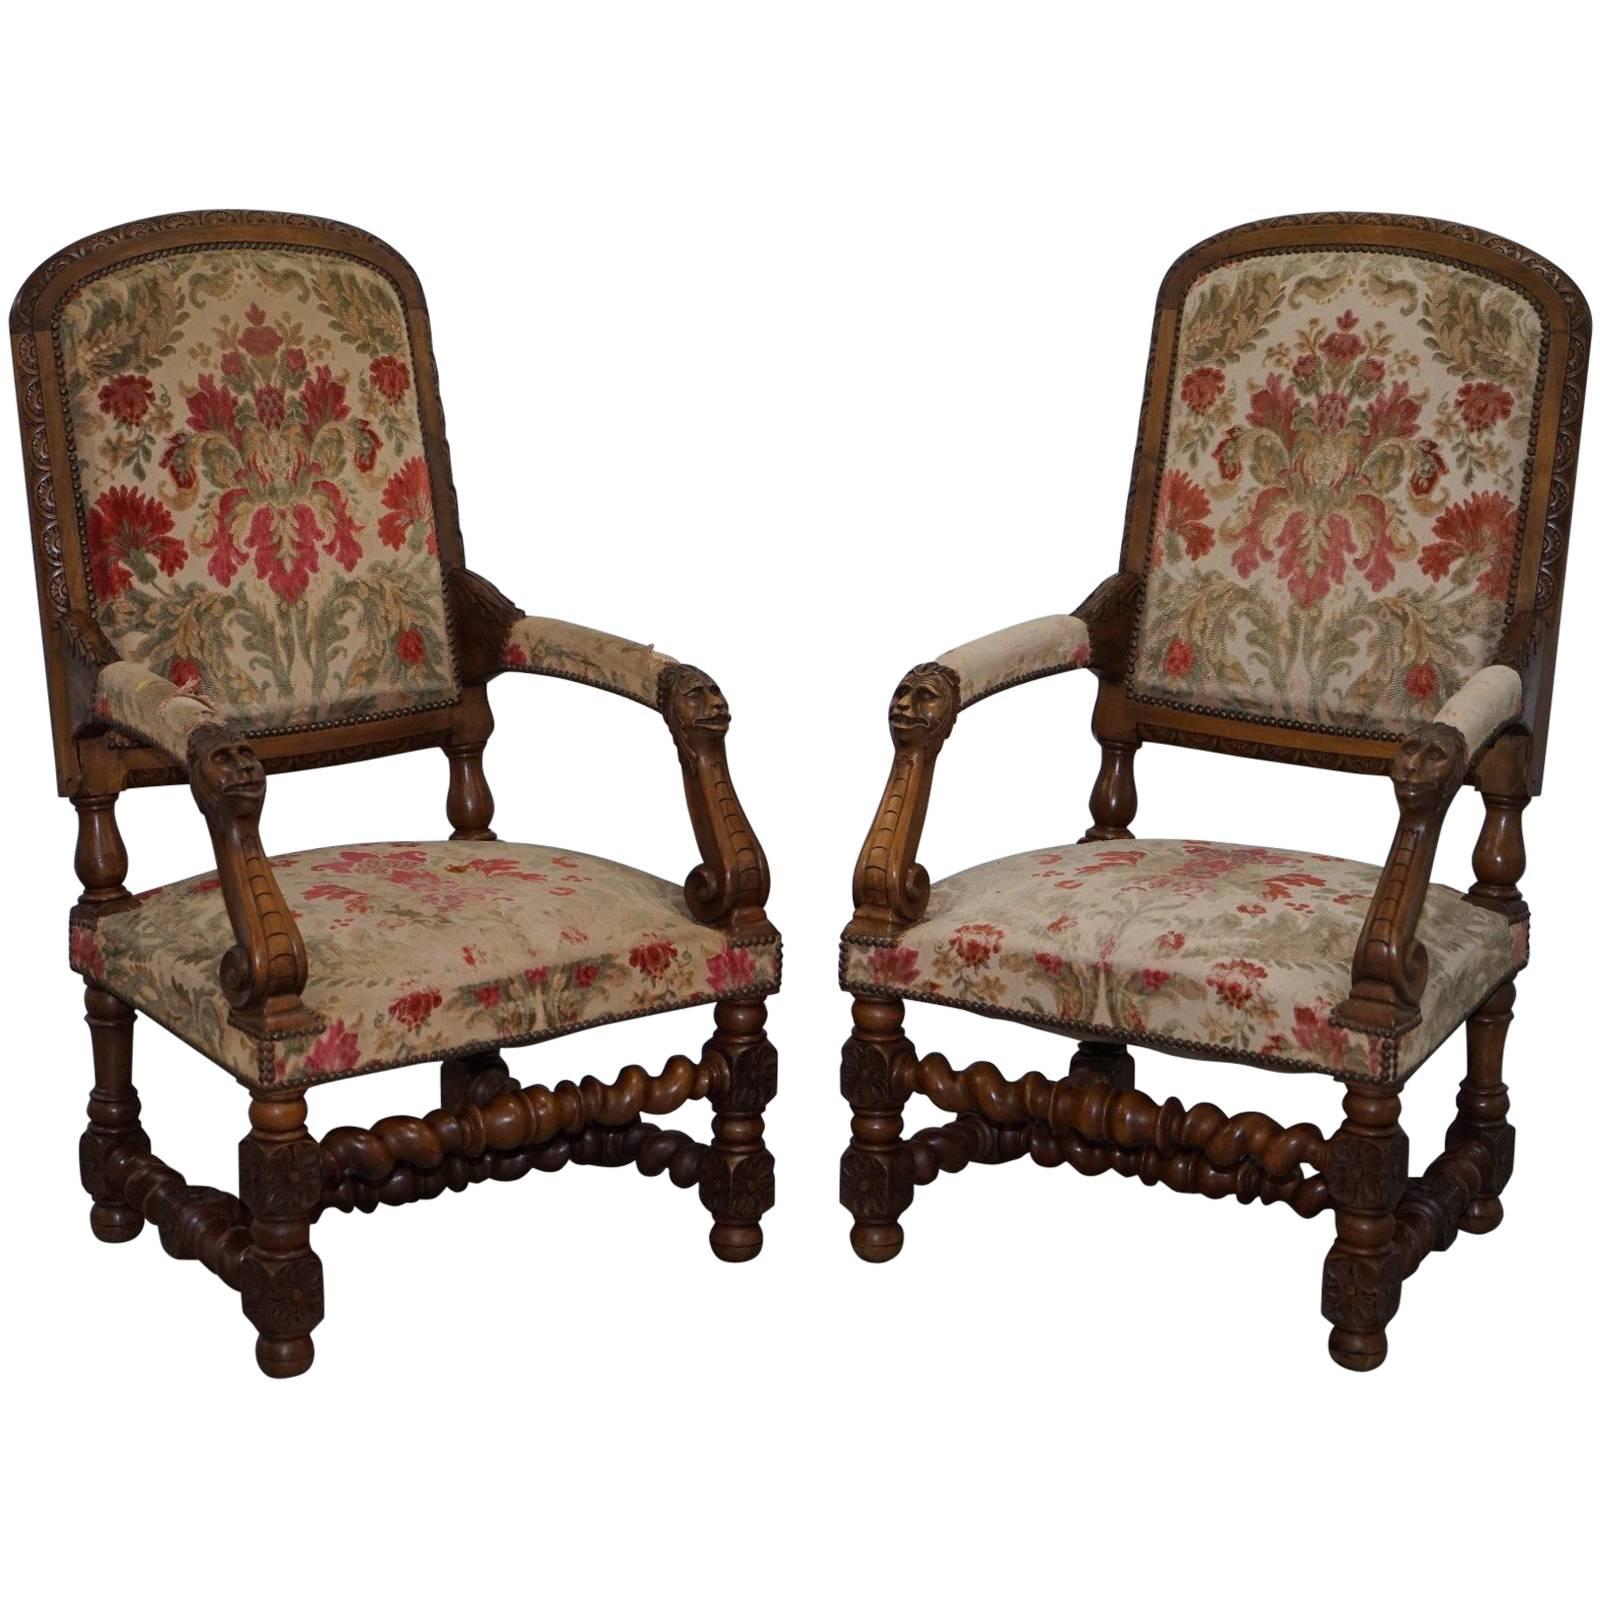 Pair of Walnut Framed Lion Head Carved Throne High Back Armchairs, circa 1870